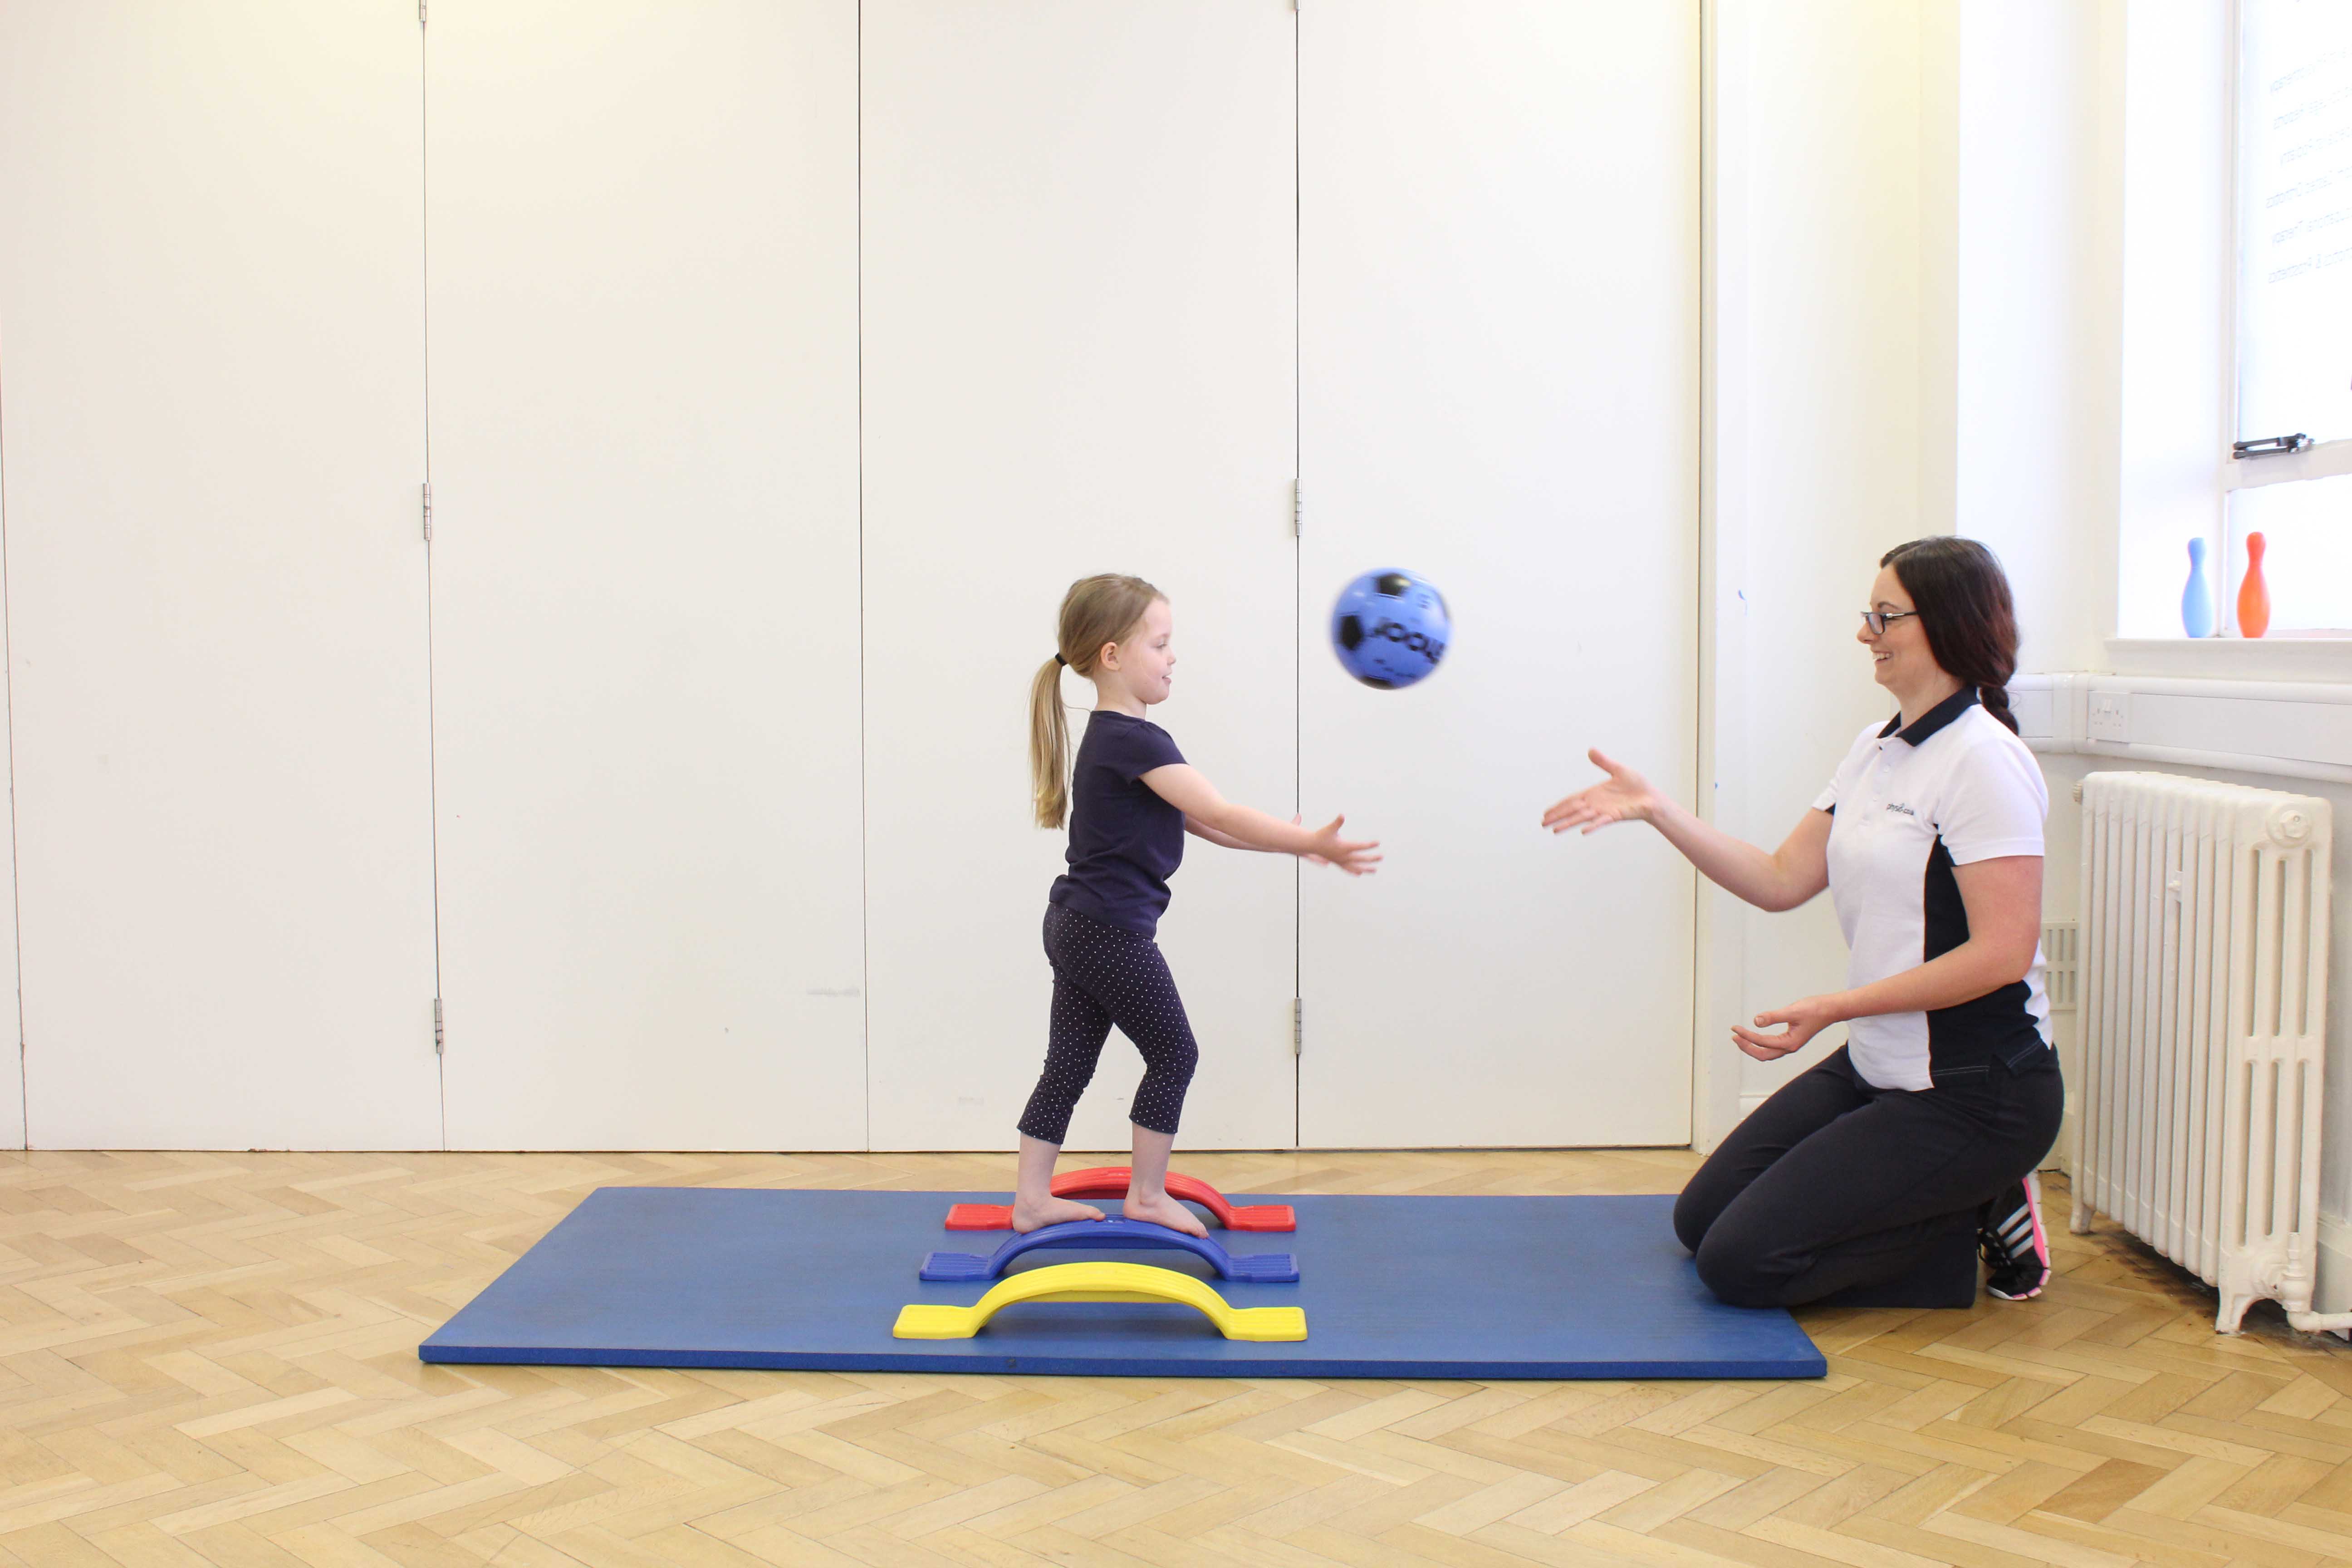 Balance and co-ordination rehabilitation exercises assisted by a paediatric physiotherapist